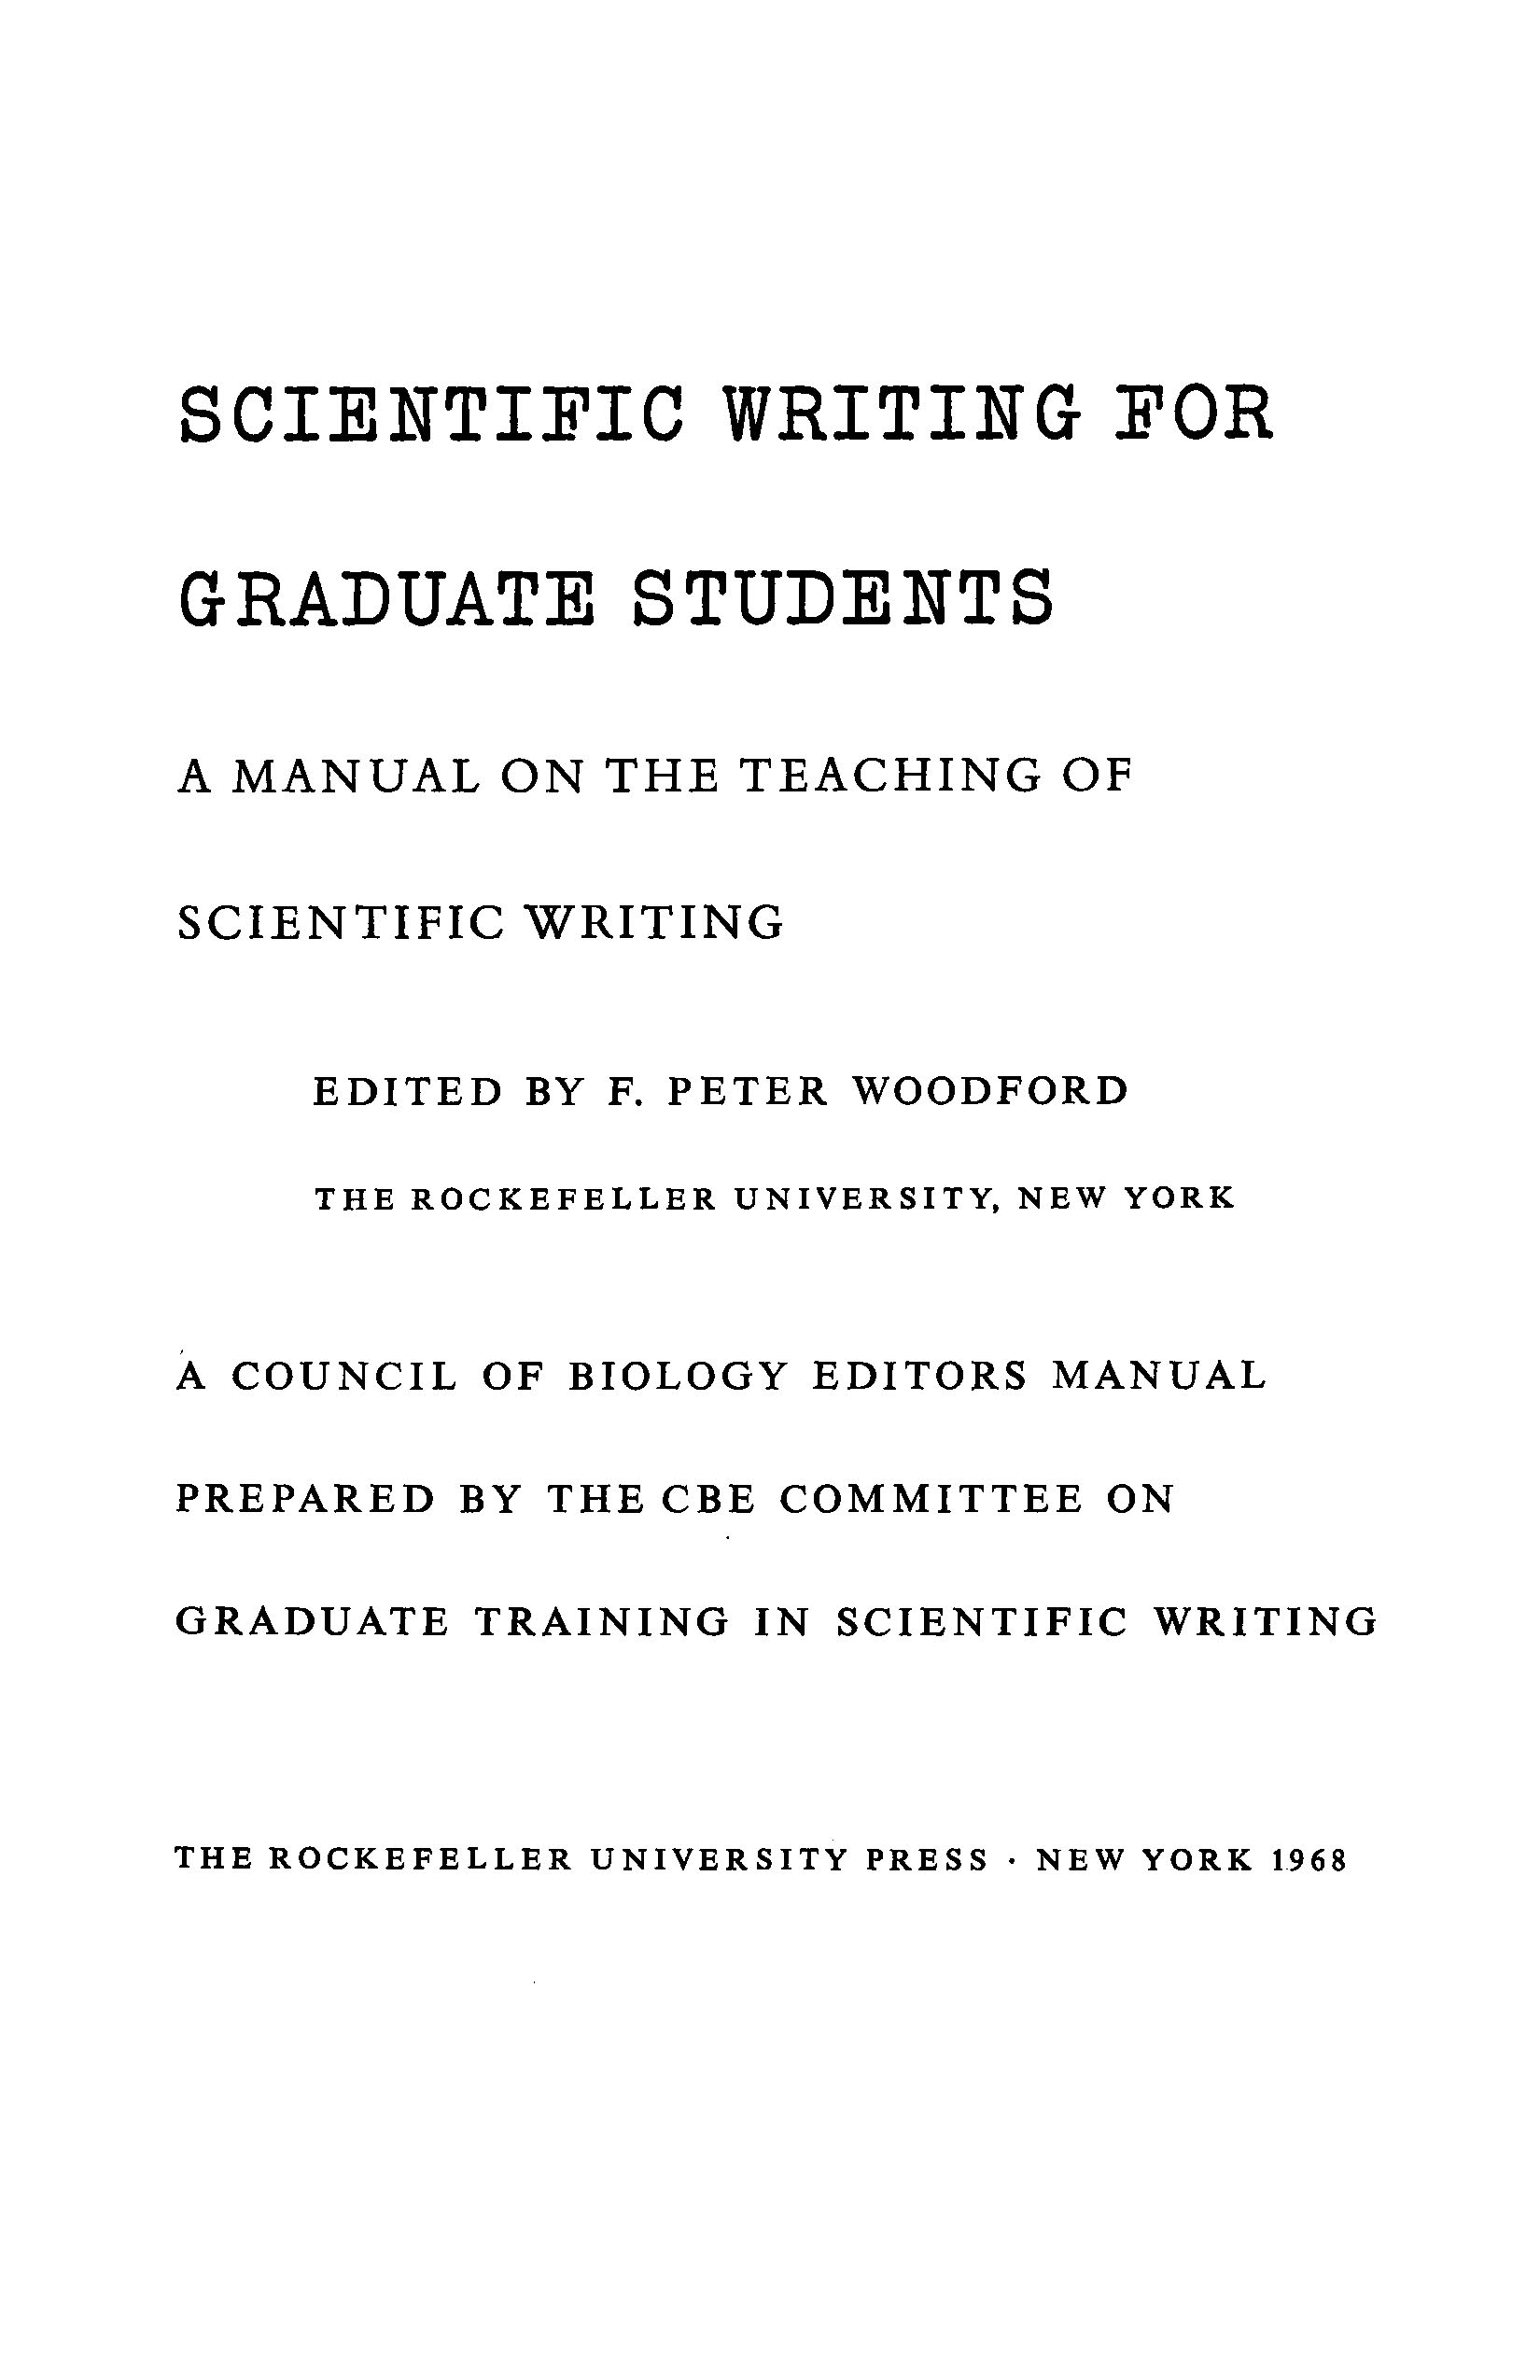 Writing for graduate students